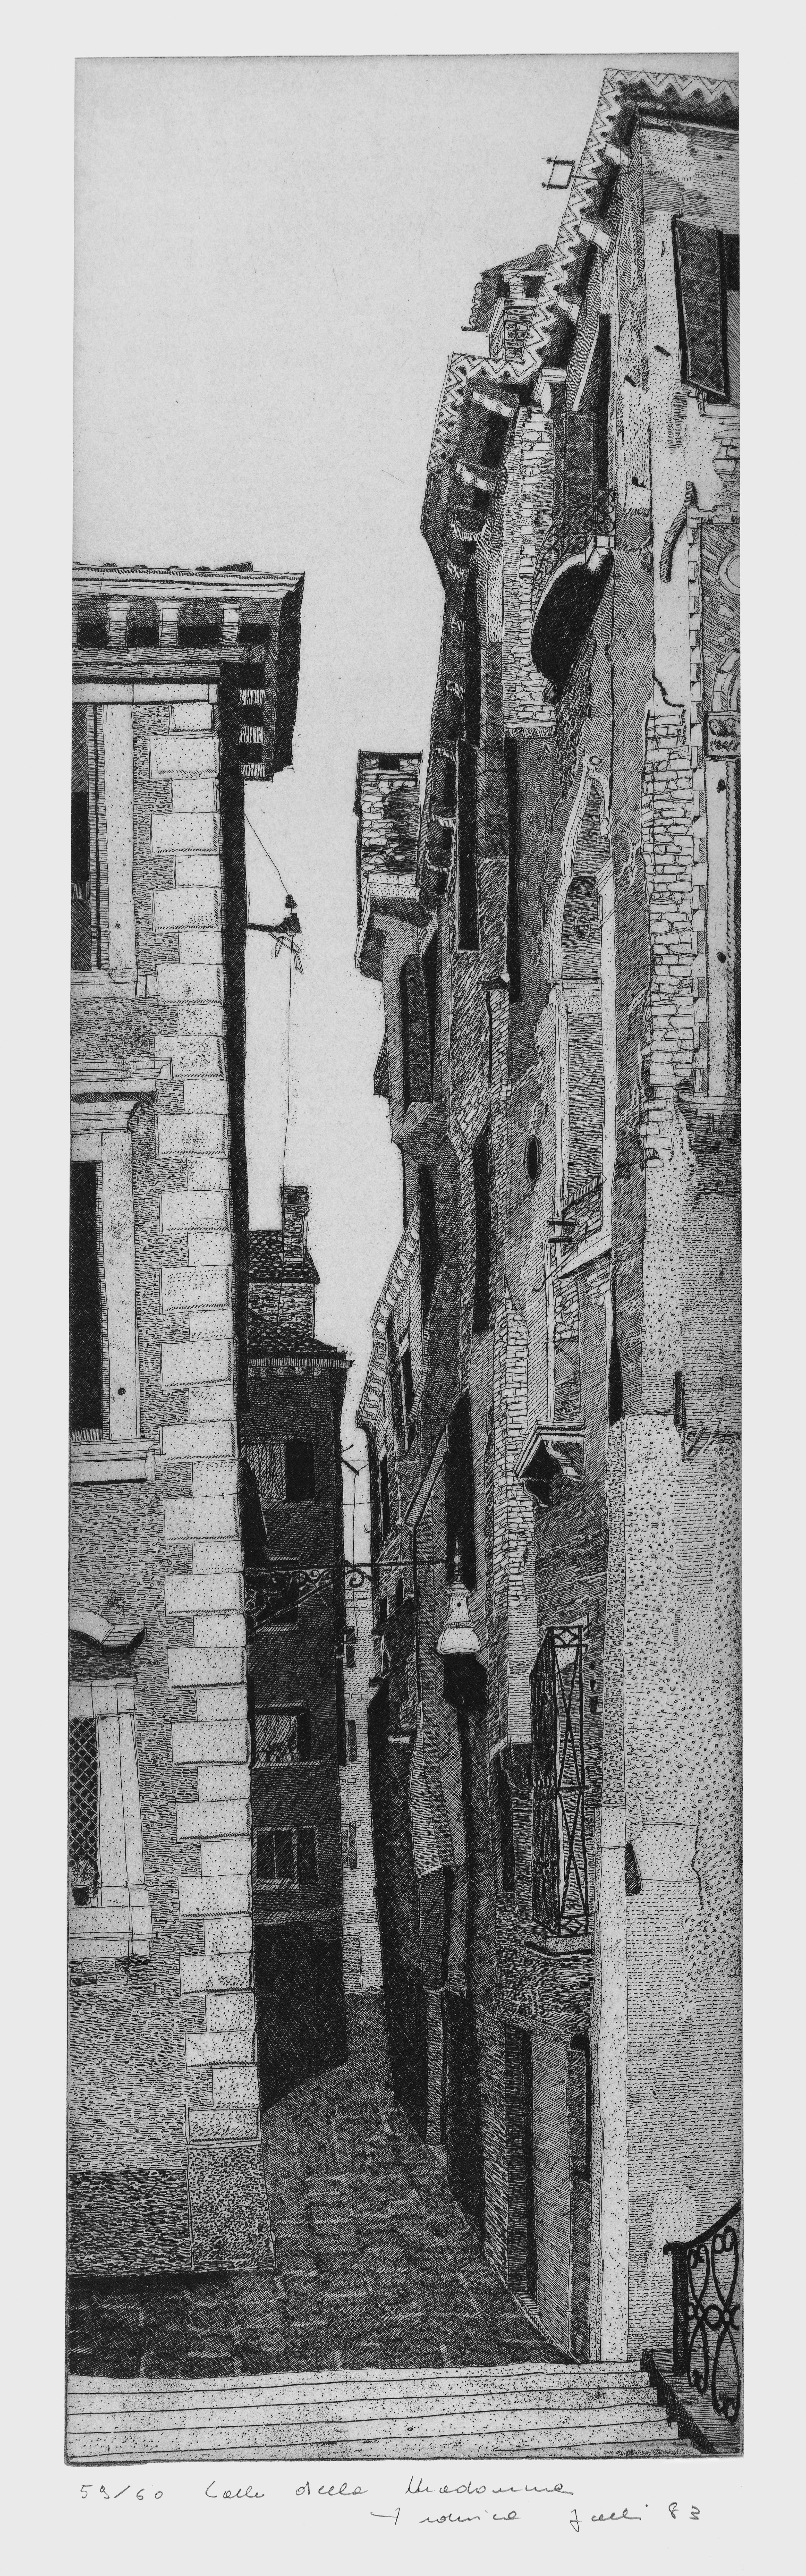 Venice views, rare complete collection, 39 prints different sizes - Realist Print by Federica Galli